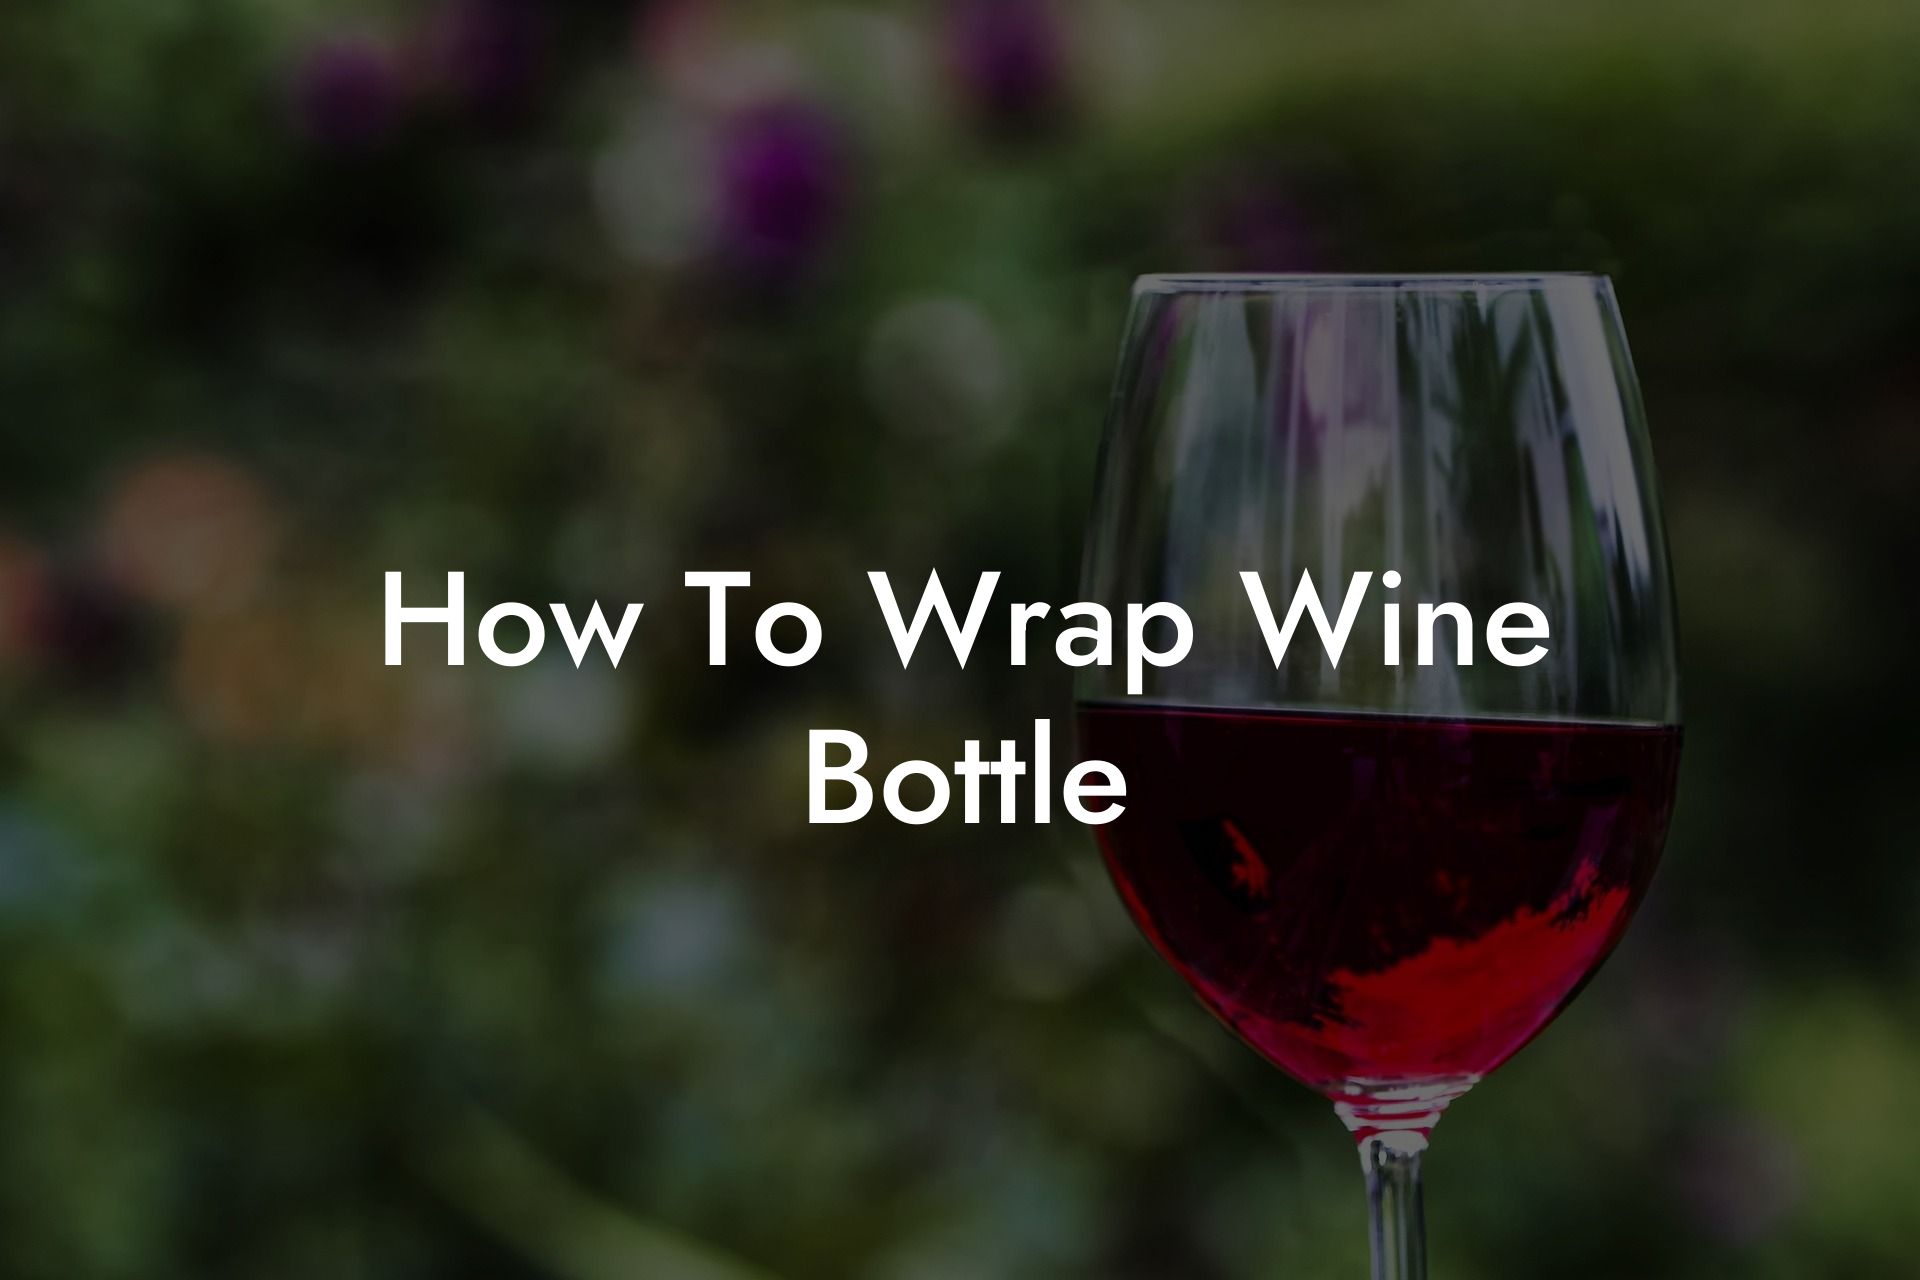 How To Wrap Wine Bottle